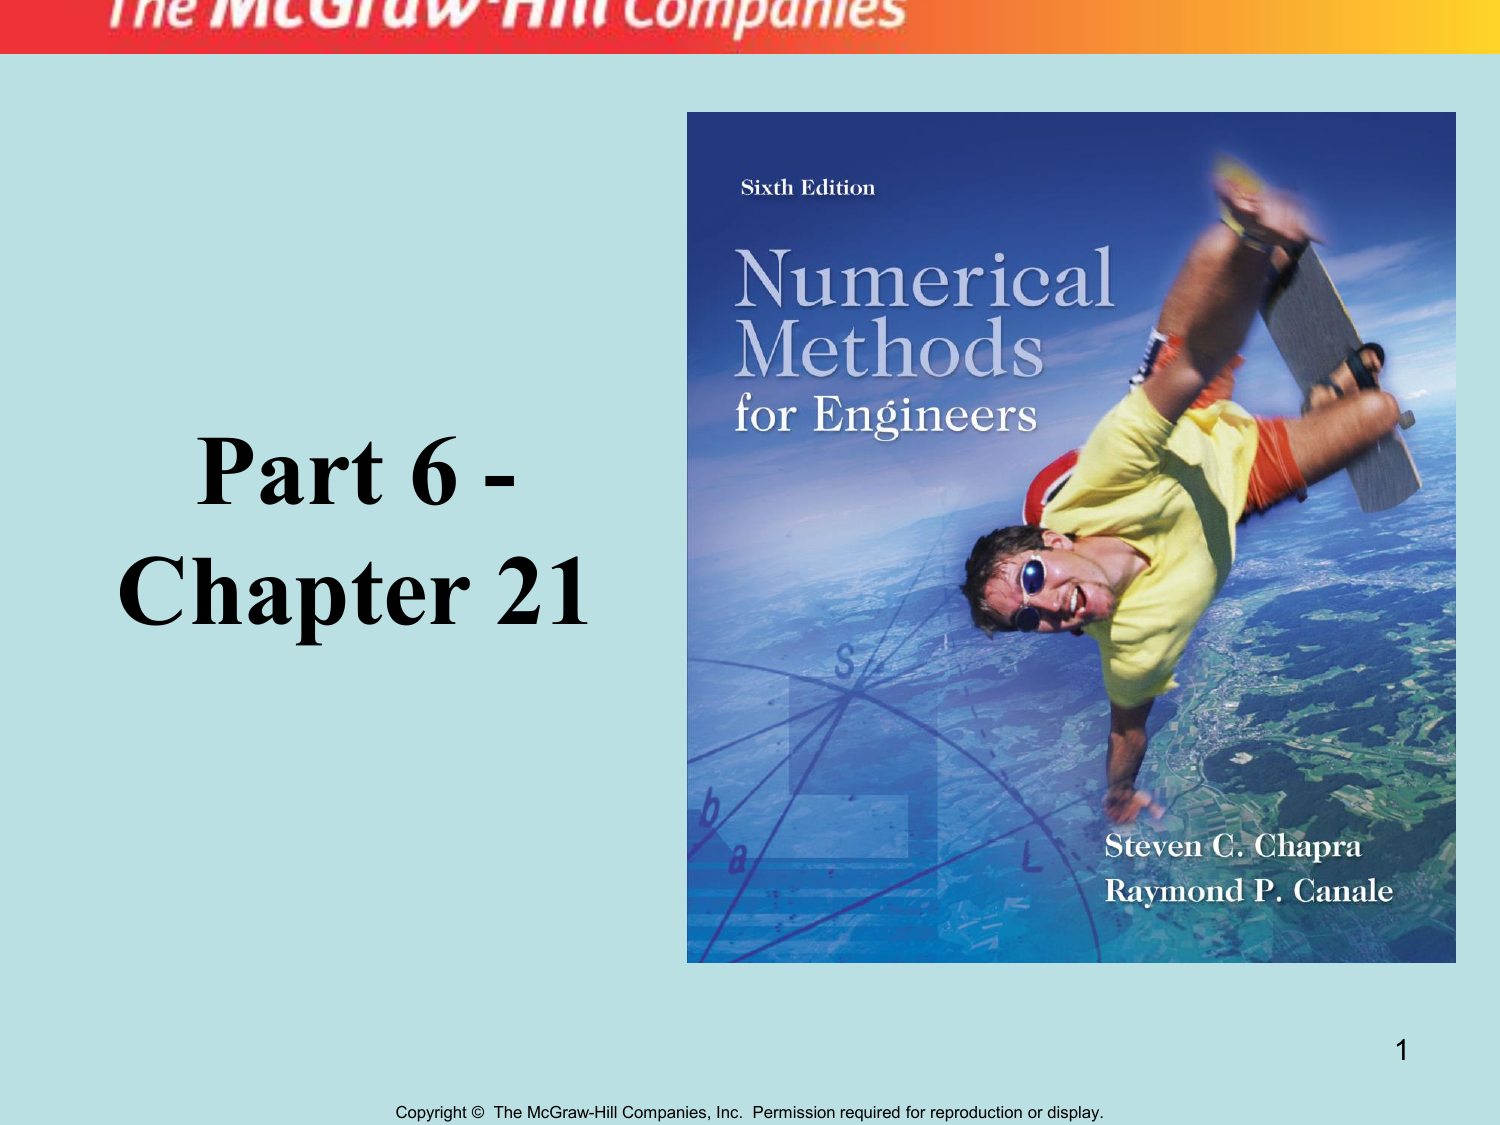 Numerical methods. Applied numerical methods with Matlab for Engineers and Scientists Steven c. Chapra. Numerical methods for Scientists and Engineers, r. w. Hamming содержание. Numerical methods reihstmayer.